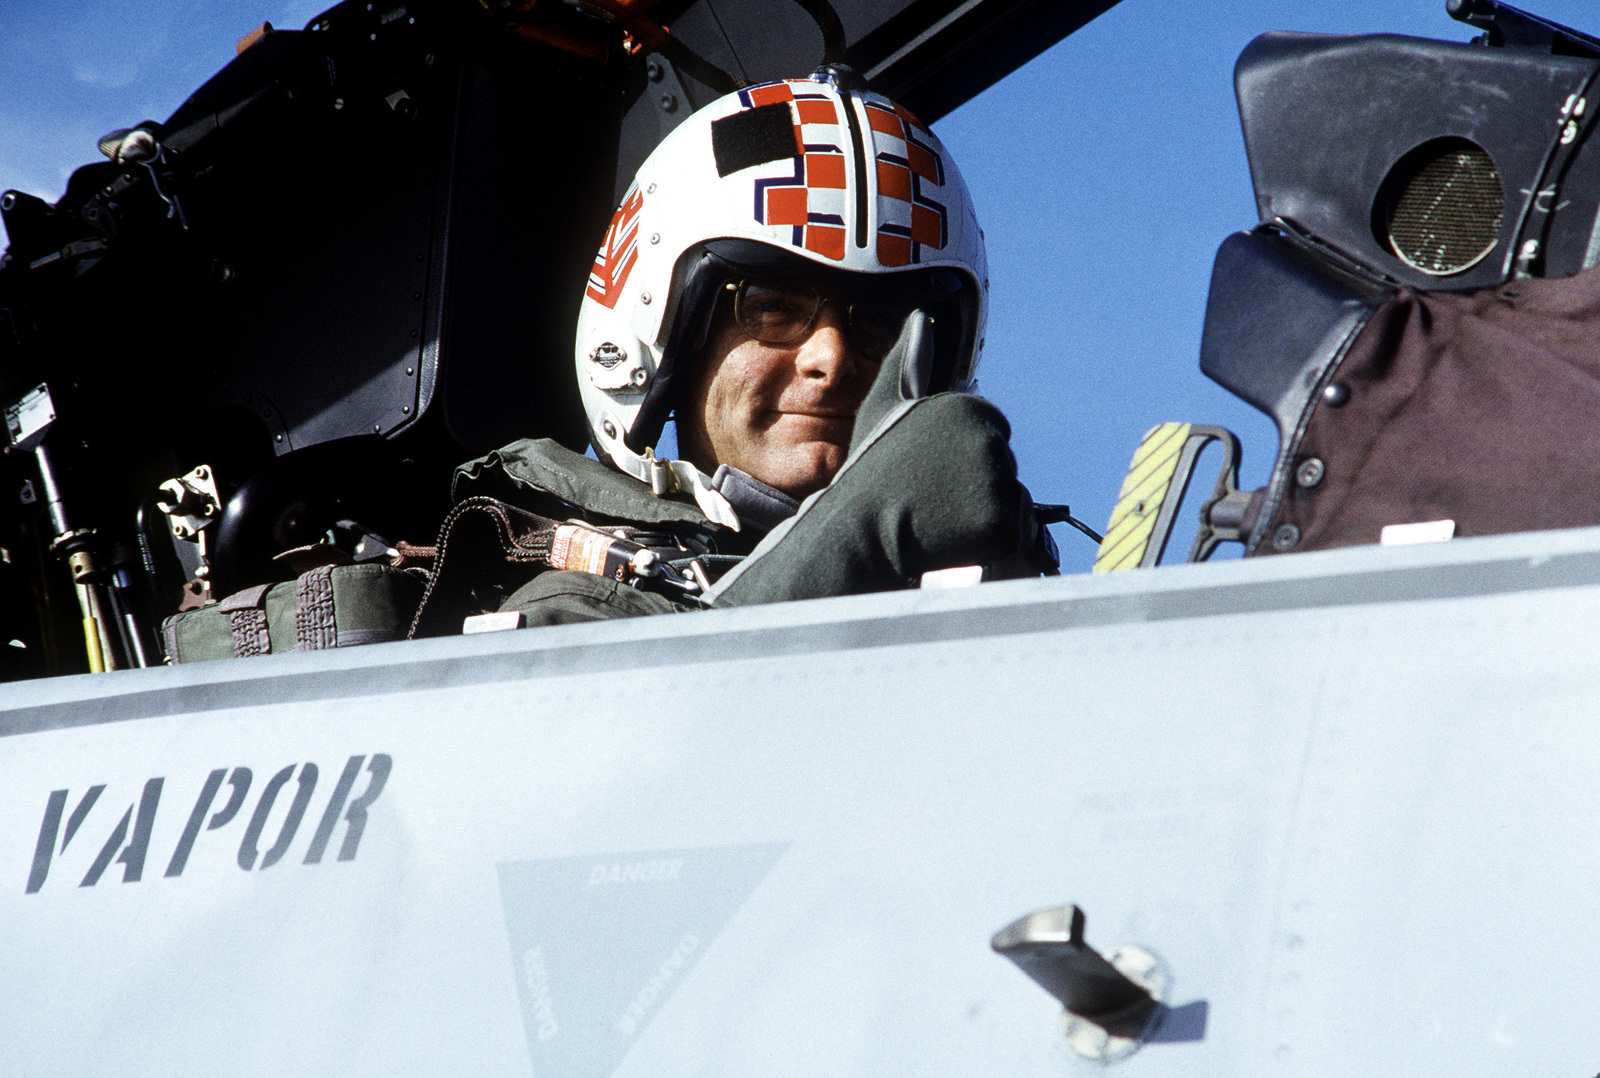 A Fighter Squadron 211 Vf 211 Radar Intercept Officer Rio Gives Thumbs Up From The Back Seat Of An F 14a Tomcat Aircraft U S National Archives Public Domain Image